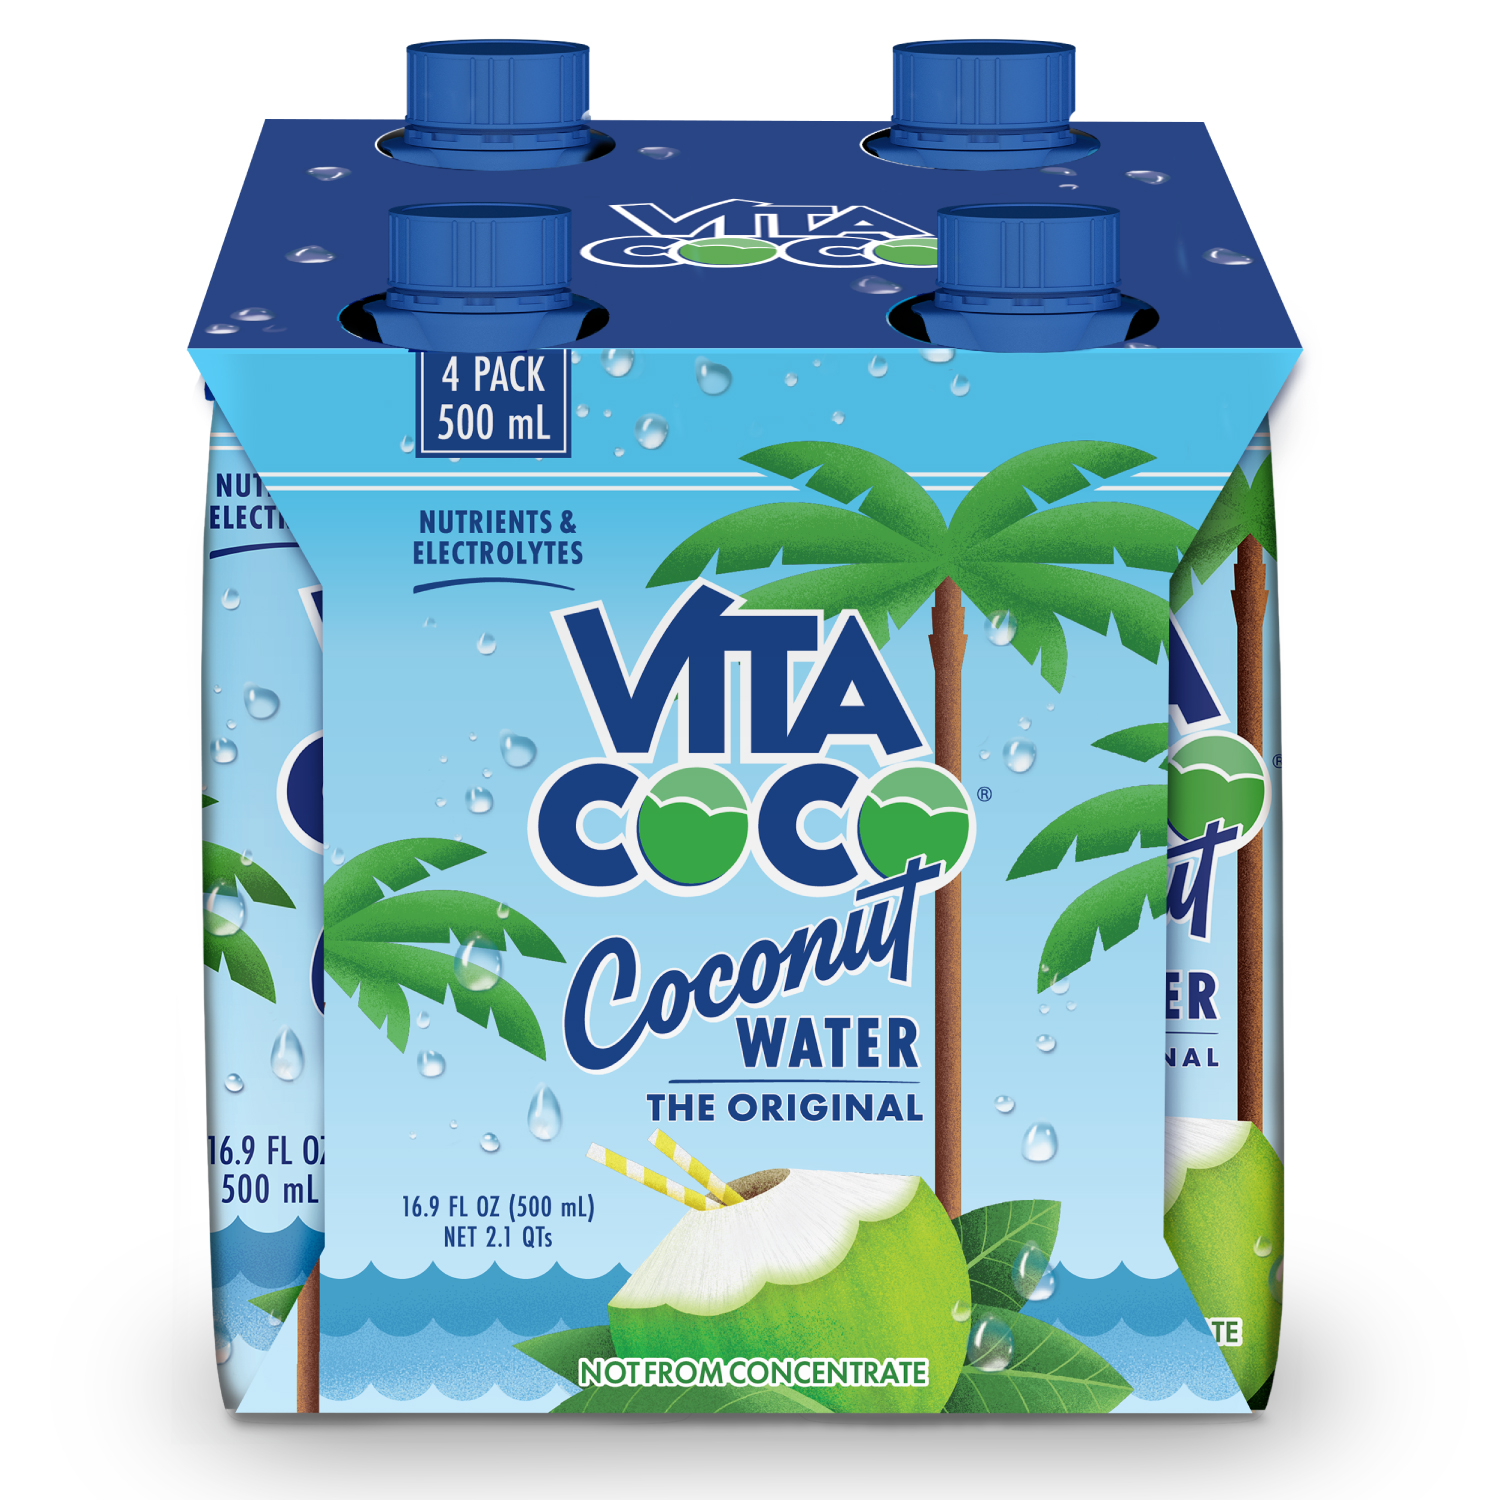 Vita Coco The Original Coconut Water, Nutrients & Electrolytes Rich, Pure, 16.9 fl oz Tetra, 4-Pack - image 1 of 8